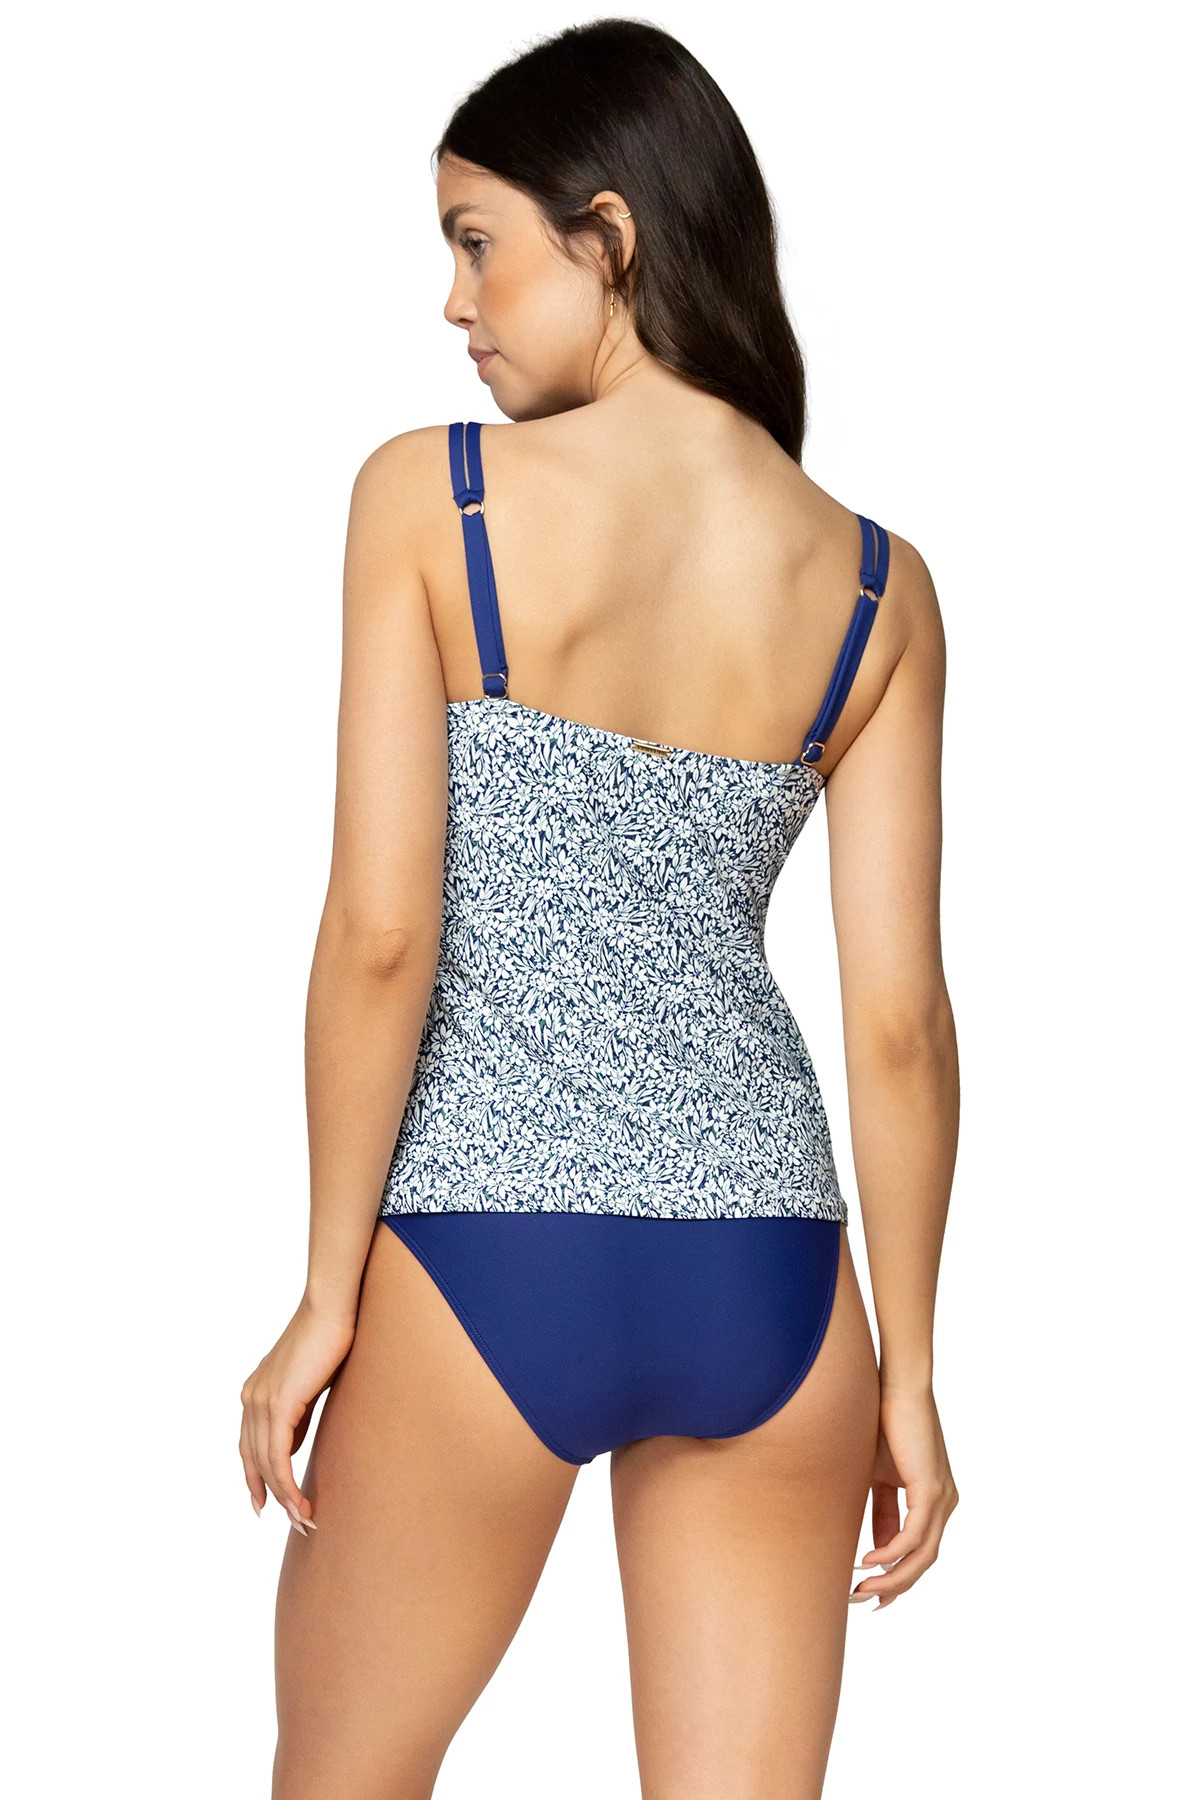 FORGET ME NOT Taylor Underwire Bra Tankini Top (D+ Cup) image number 2